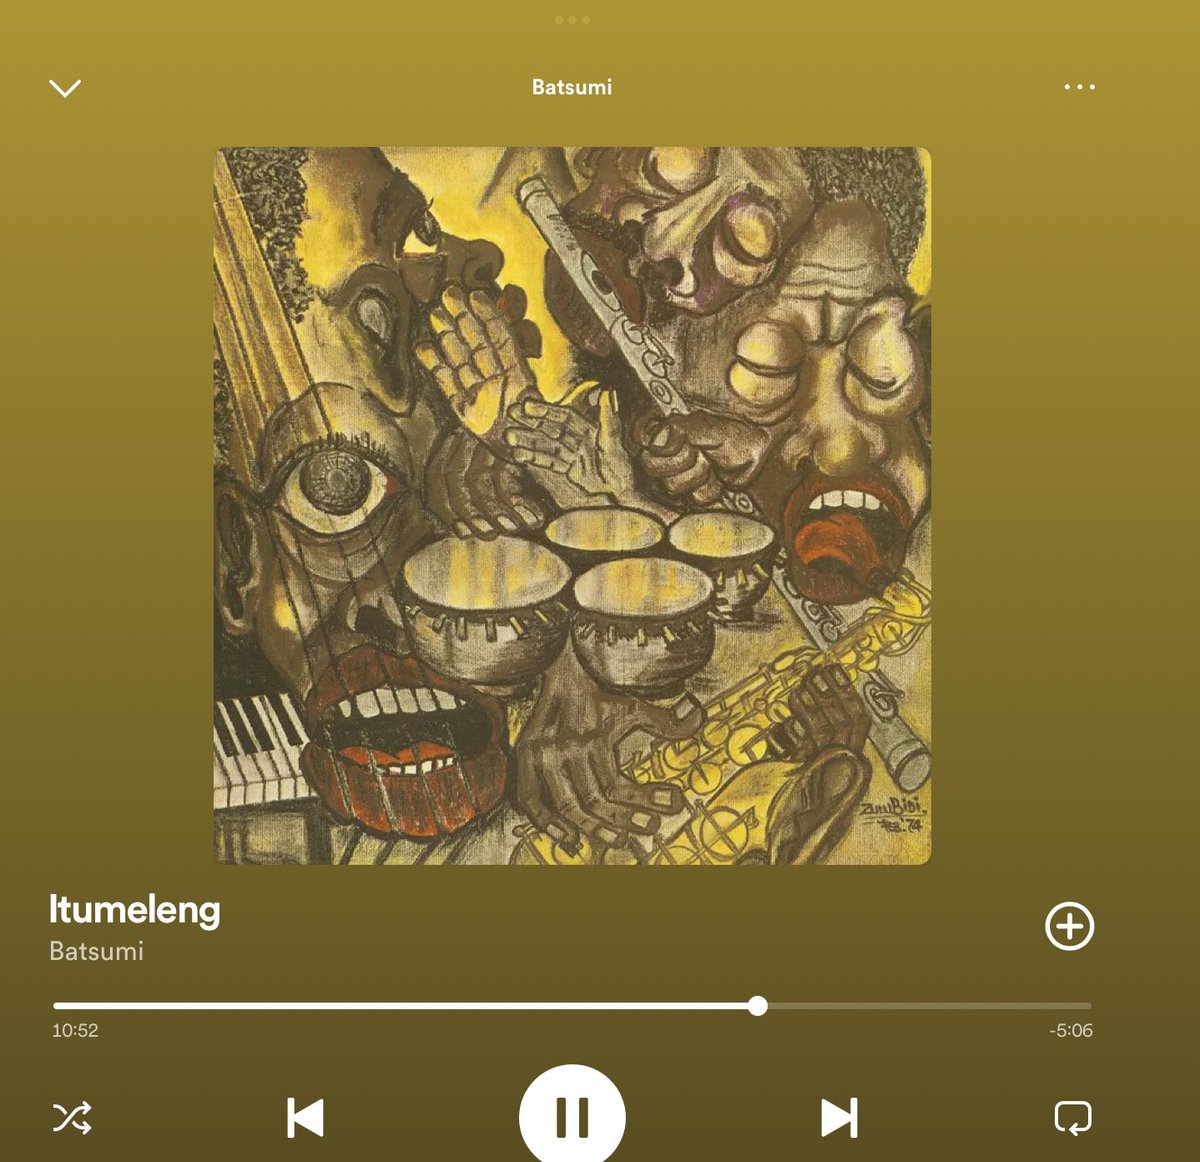 It’s basically never possible to stop discovering incredible music. Batsumi is a South African jazz band from the 70s who I just learned of. The grooves on this are wonderful.